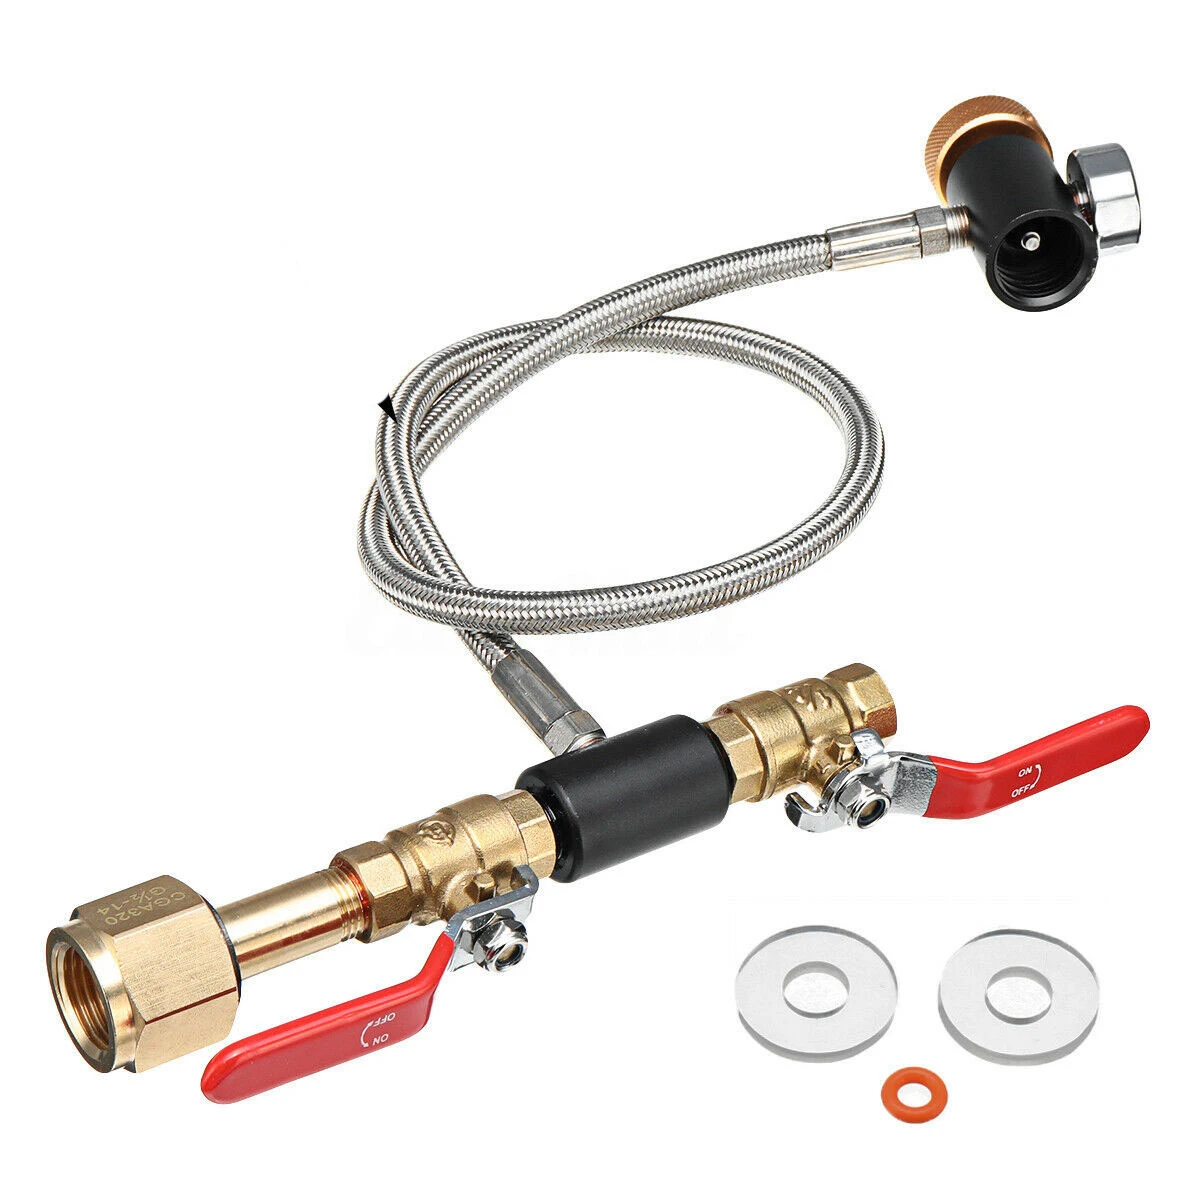 

G1/2 CO2 Cylinder Refill Adapter Hose, CO2 Refill Station Connector Kit for Filling Soda Maker for Sodastream Tank